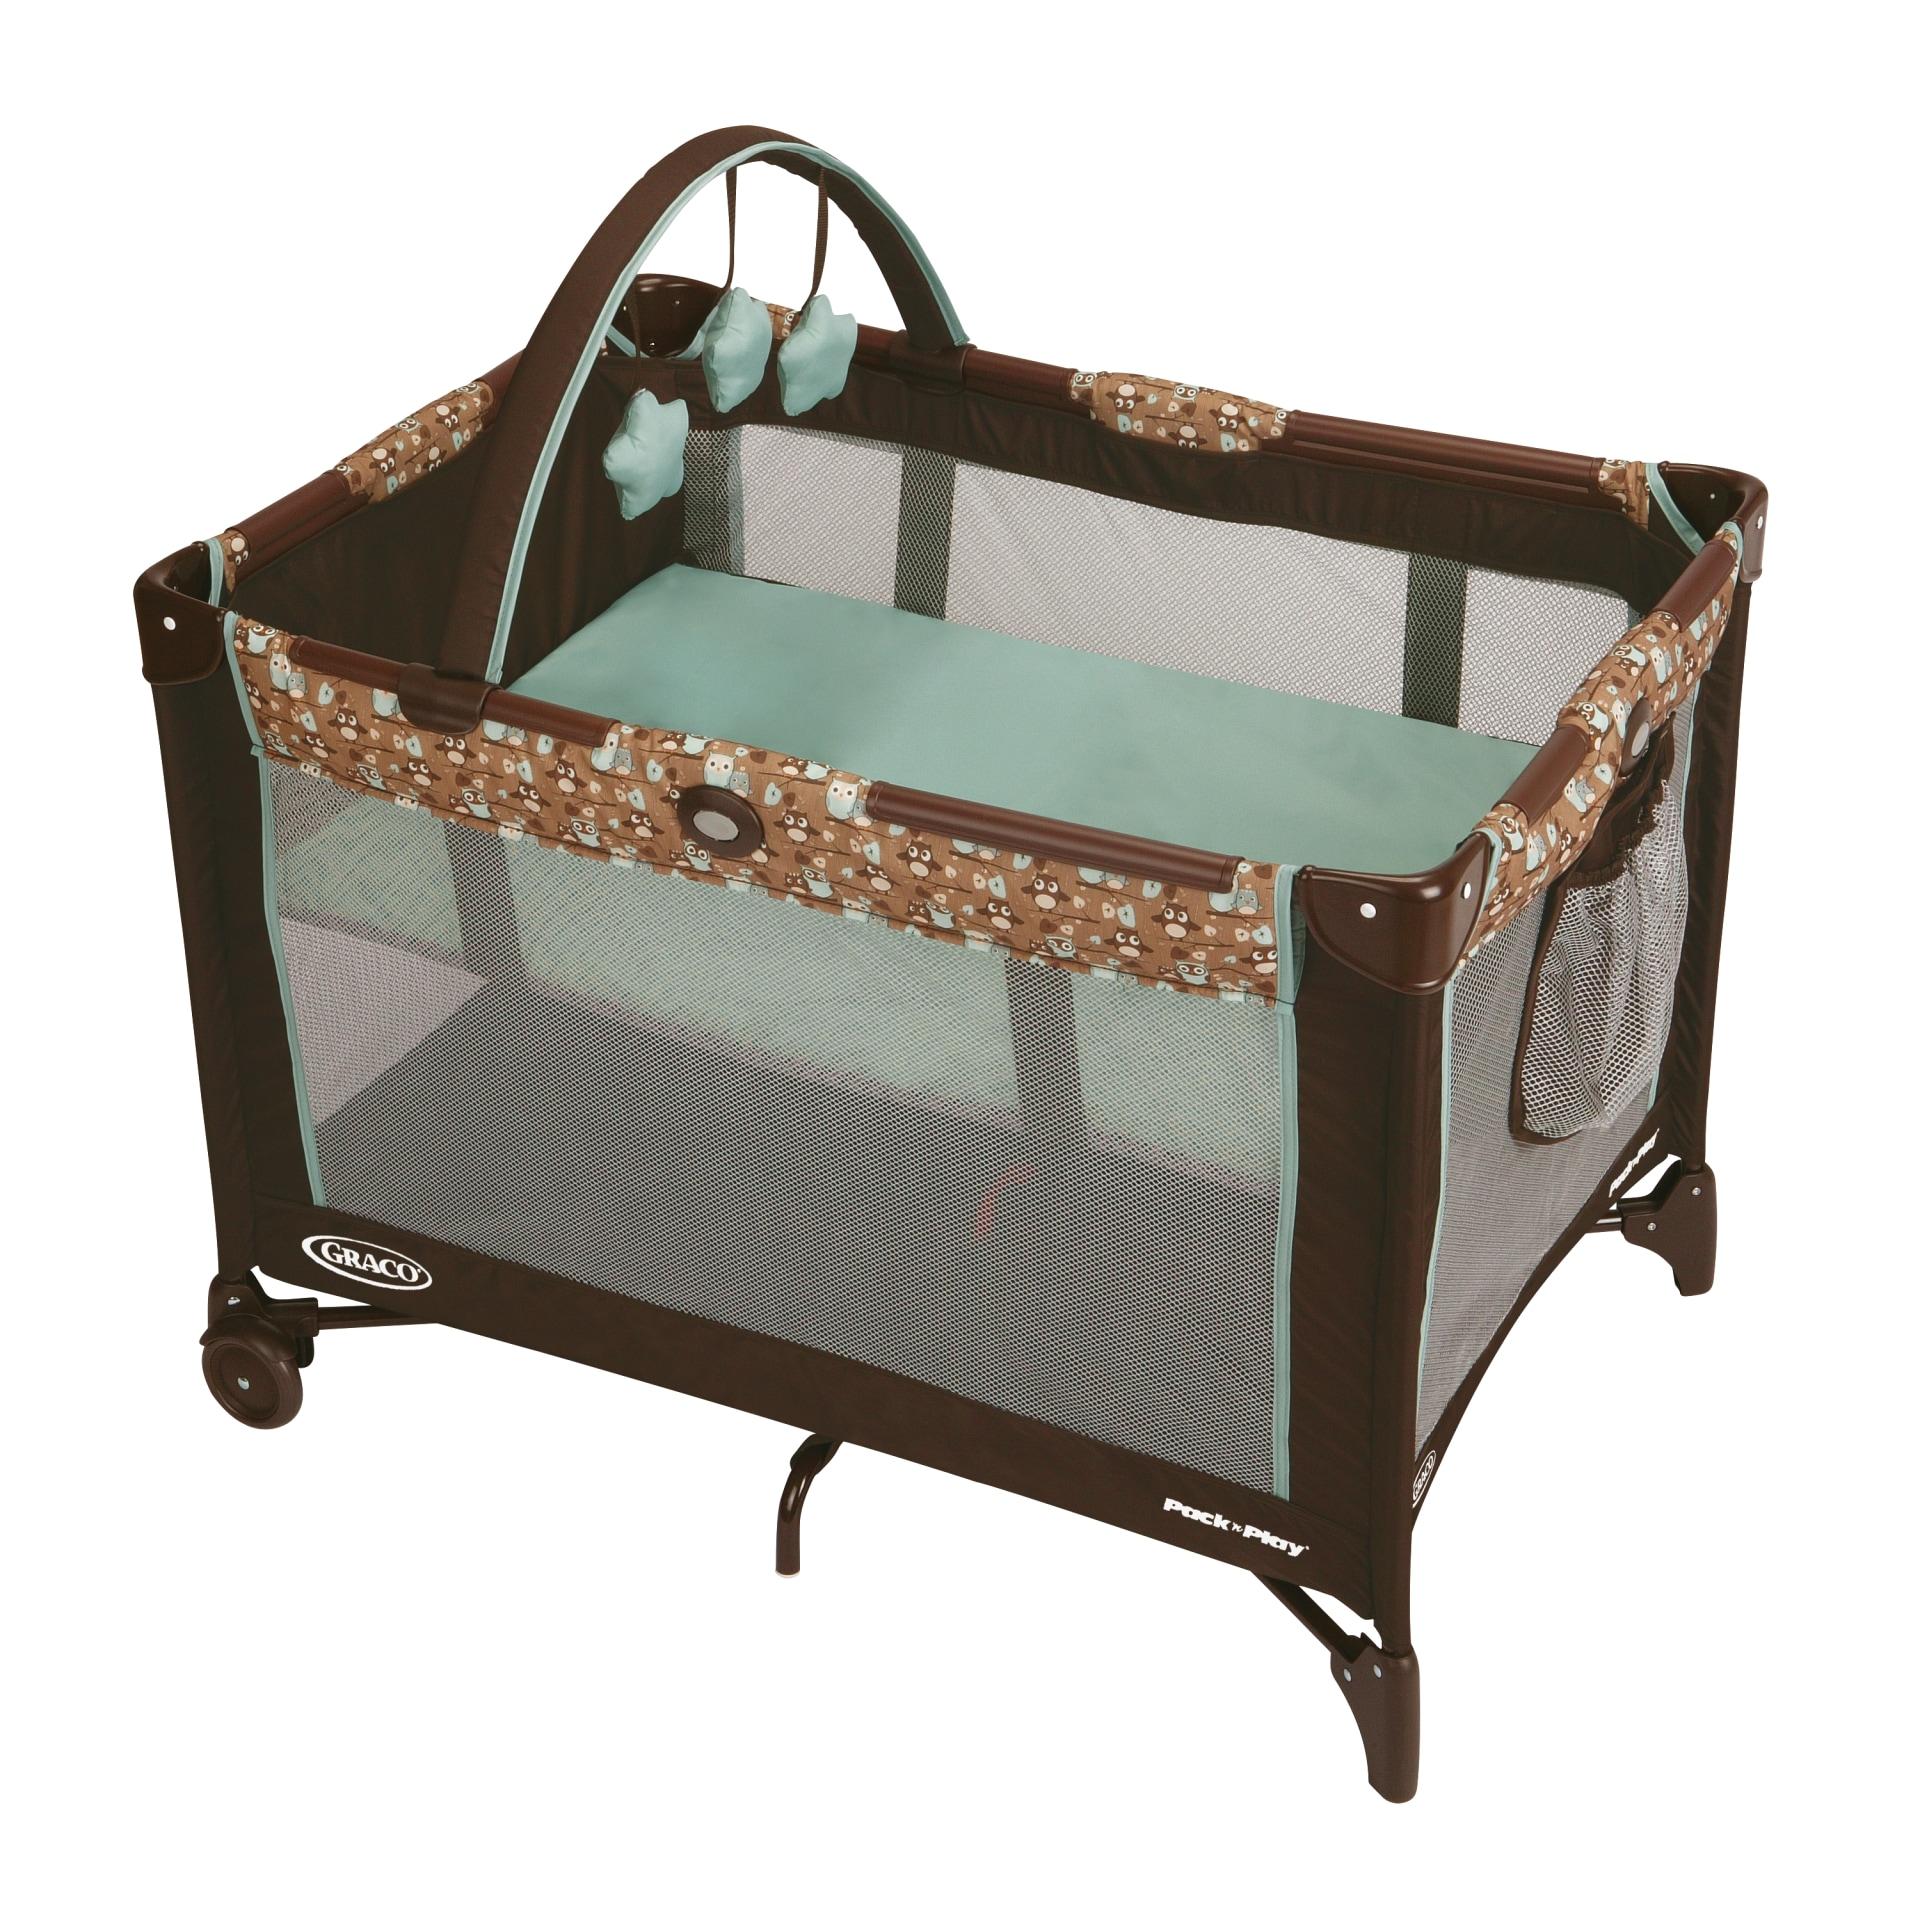 Graco Pack n Play On the Go Playard for $47.59 Shipped